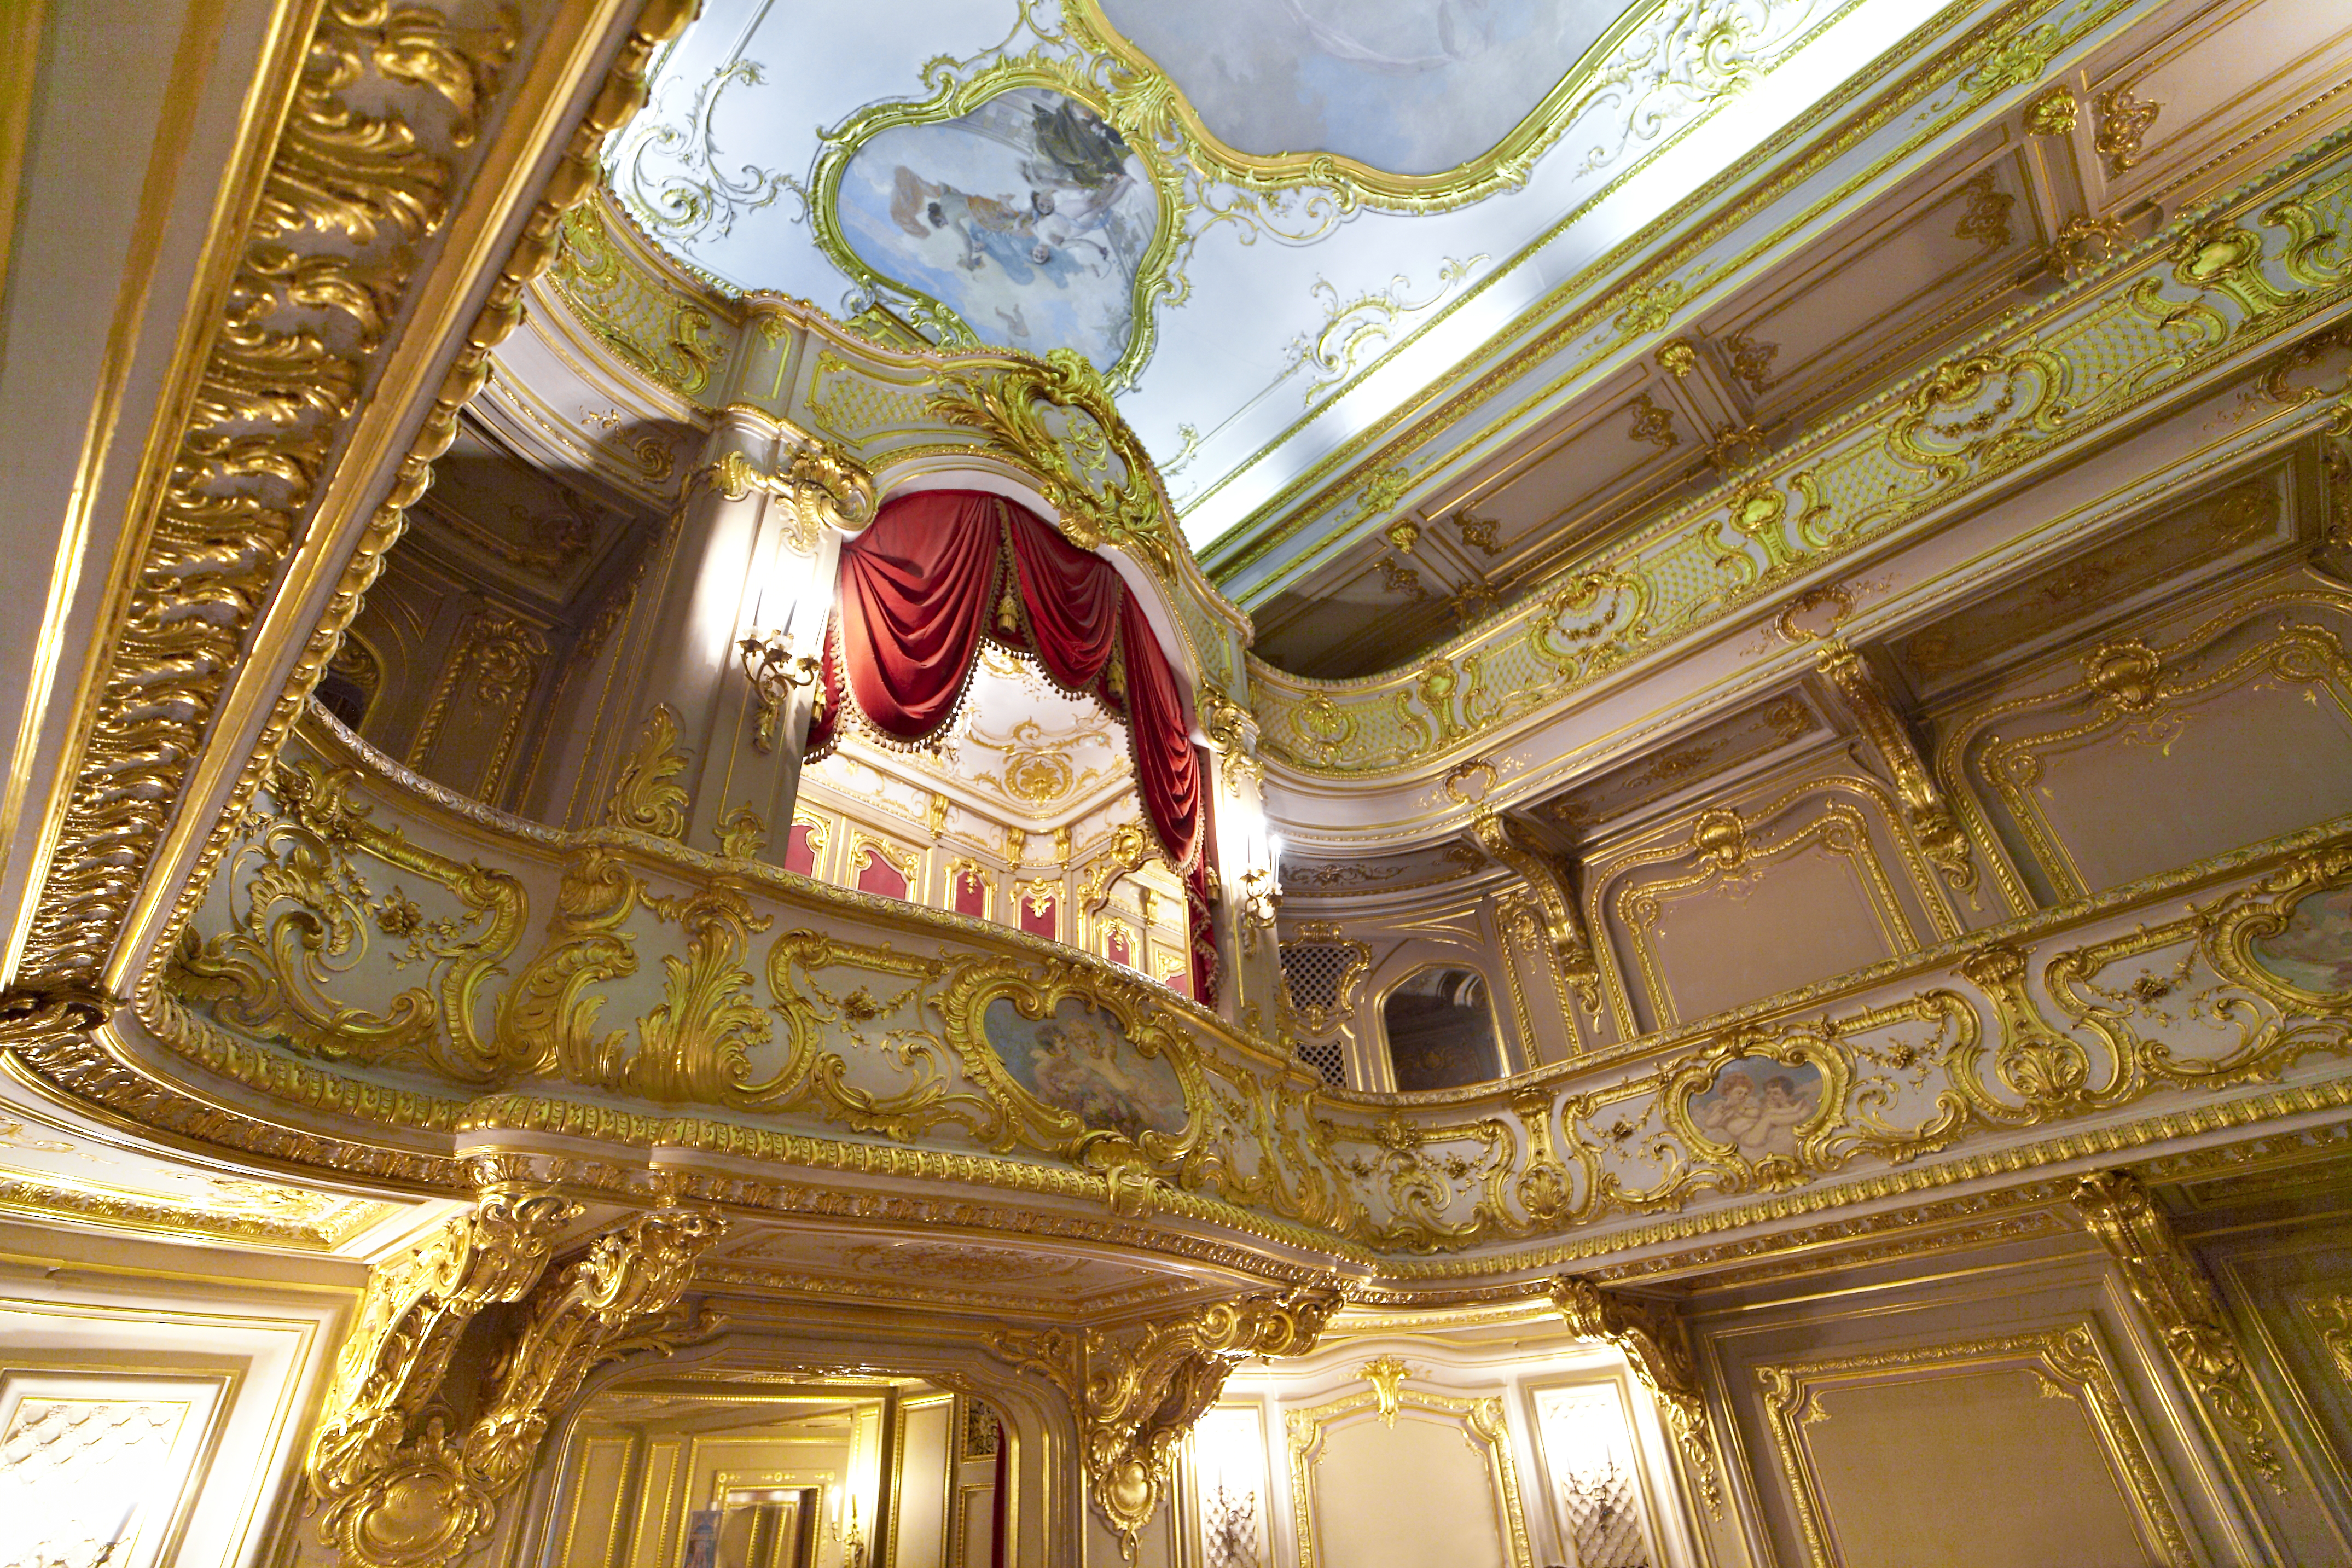 The Home Theatre of the Yusupov Palace